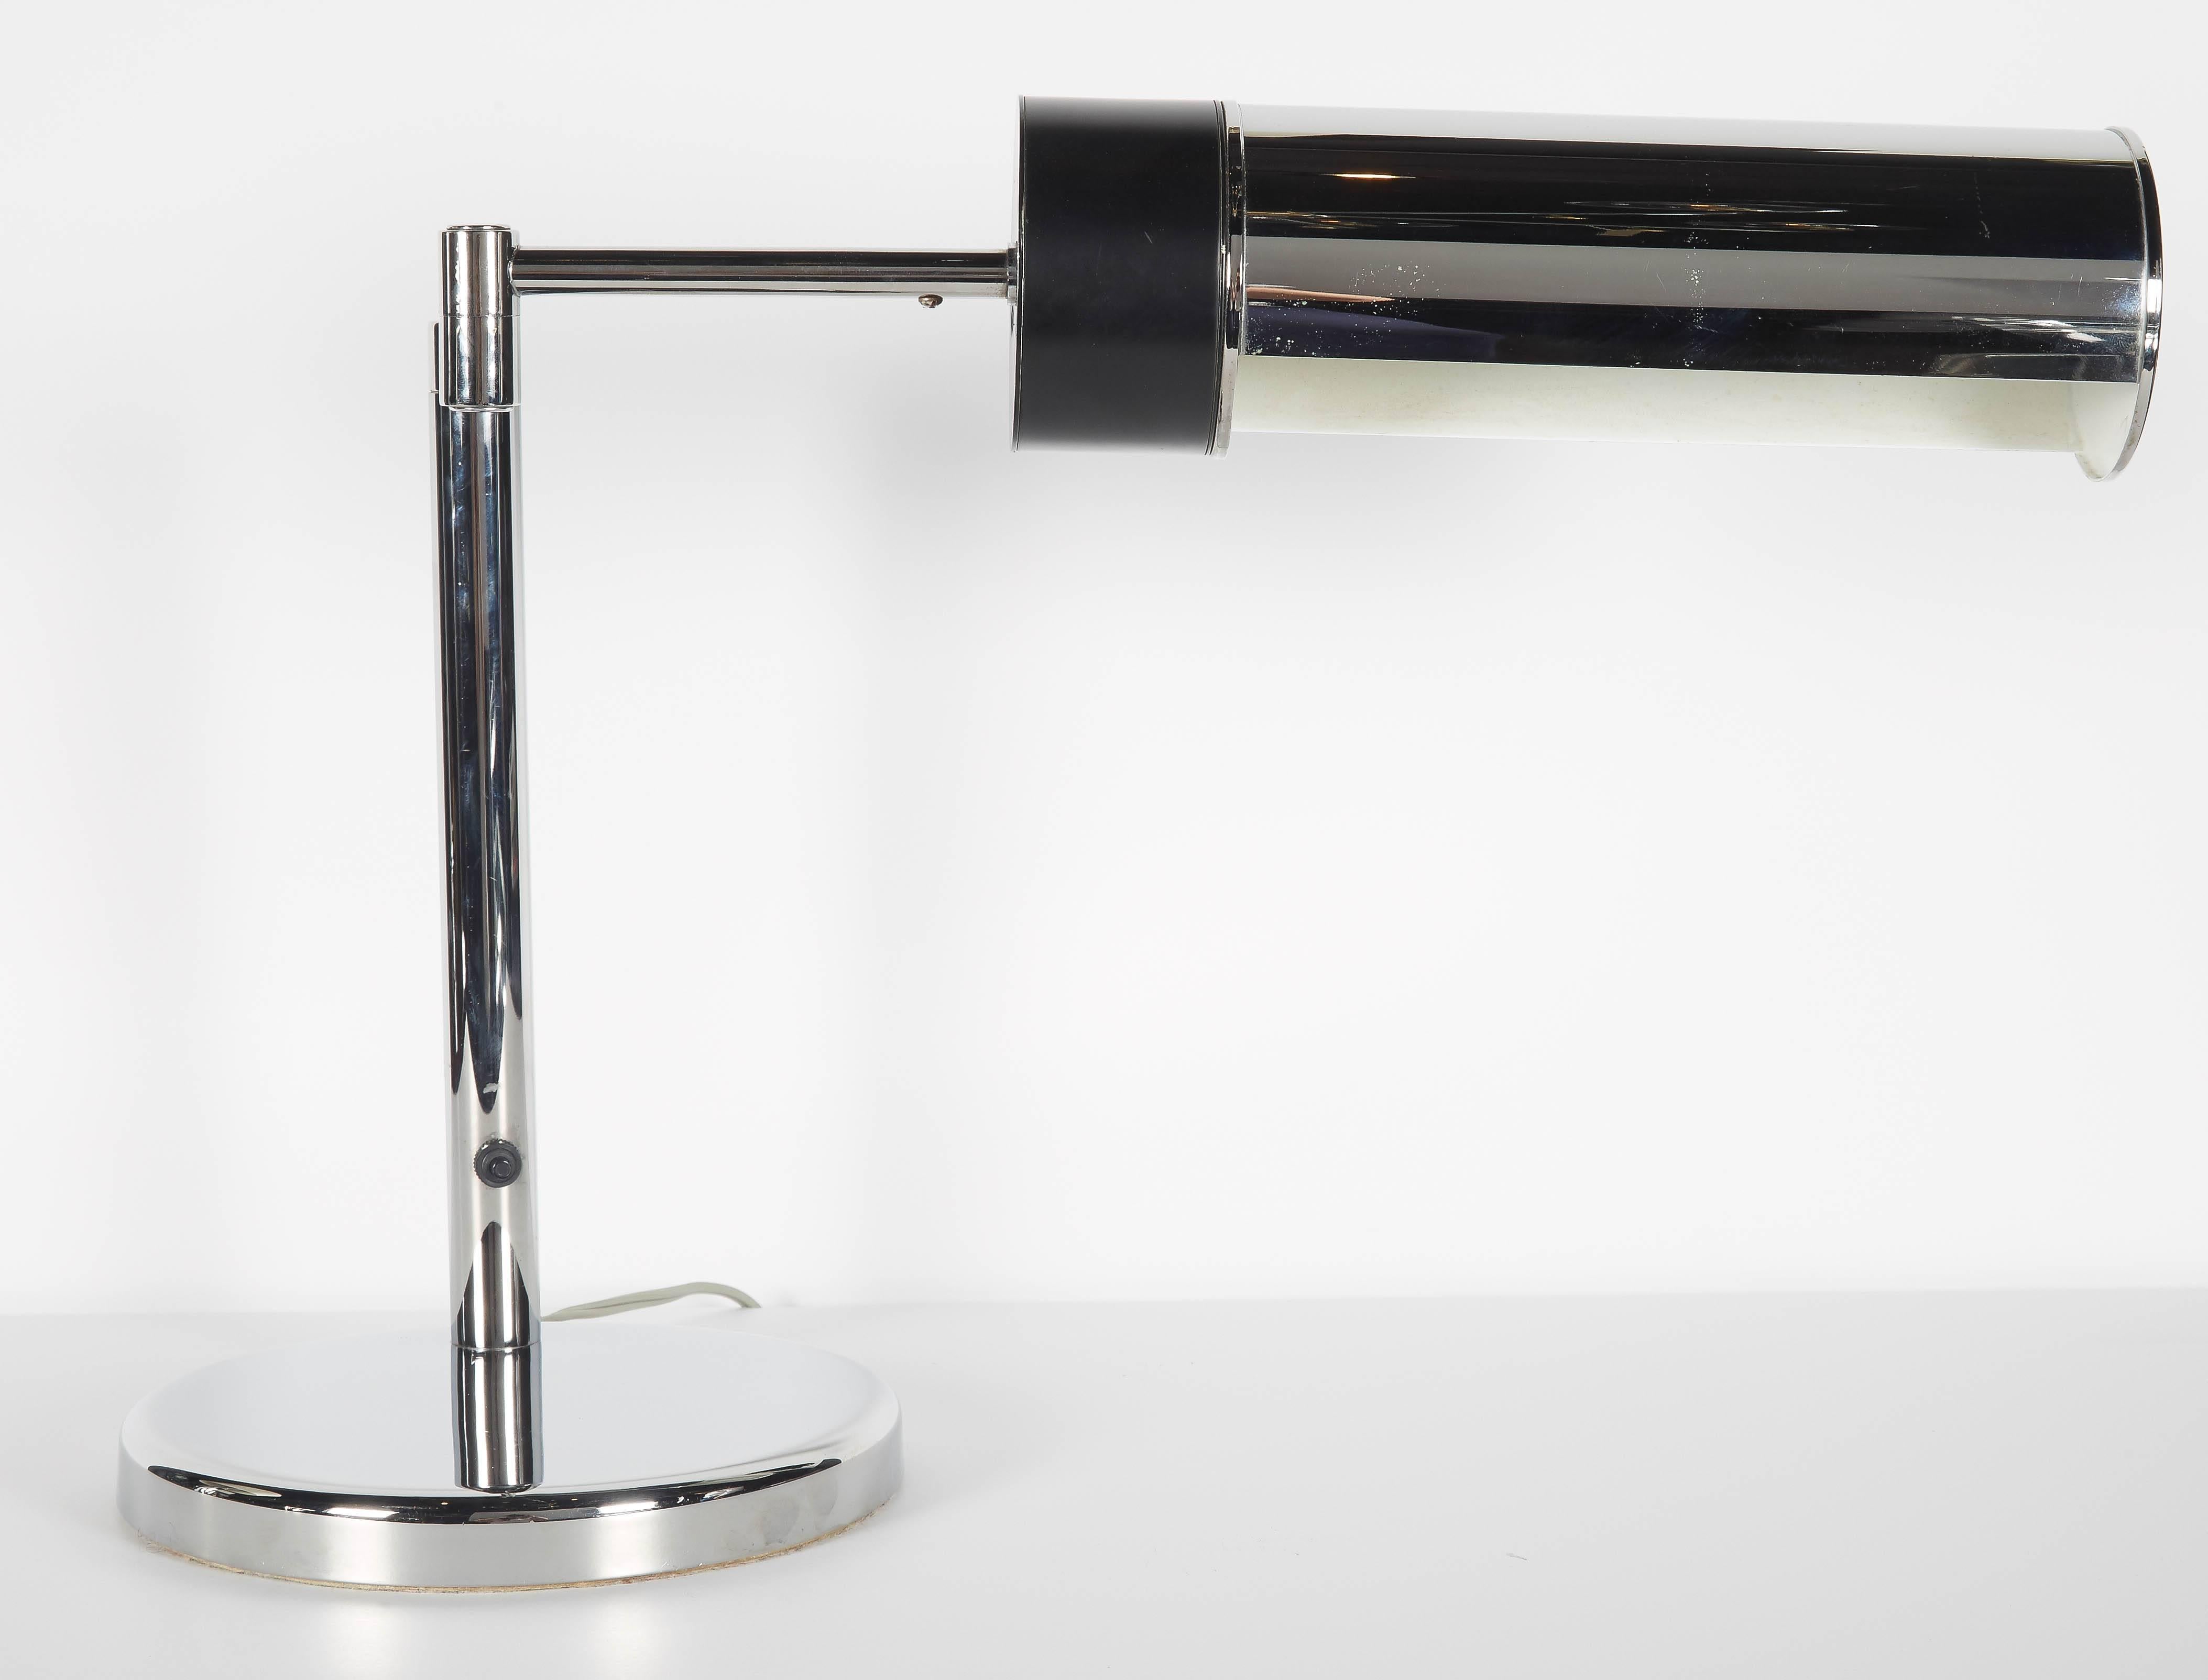 Mid-century modern Walter Von Nessen, Nessen Studio desk lamp with swing arm design and adjustable shade. The lamp has a sleek cylinder design with circular base in polished chrome and the shade features black enameled metal accent. Fitted with